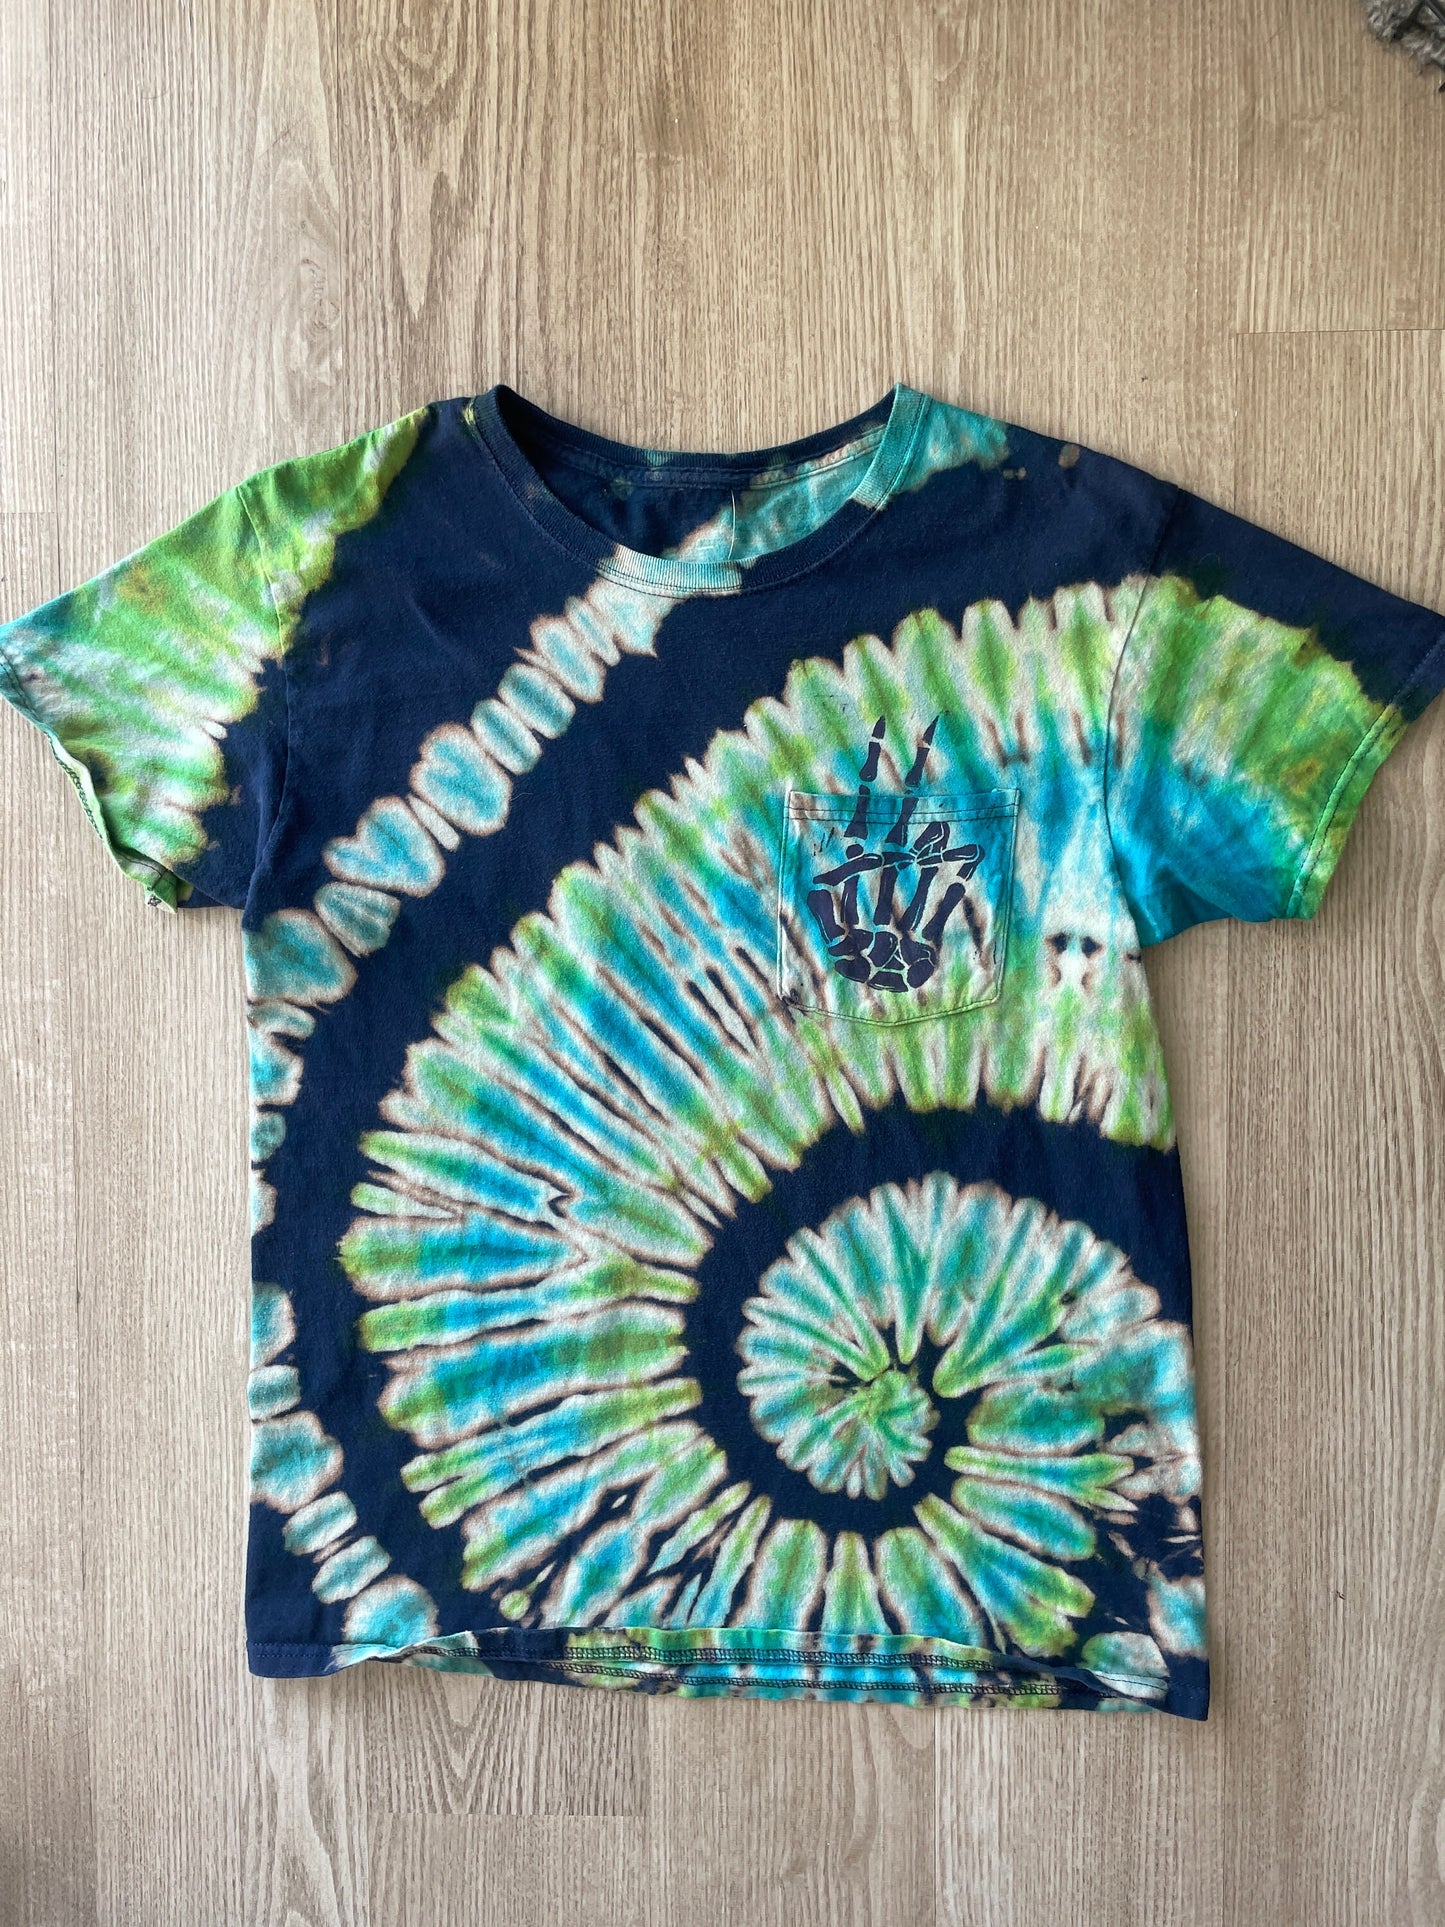 M/L Men's Hand-Printed Skeleton Peace Sign Reverse Tie Dye Short Sleeve T-Shirt | Handmade One-Of-a-Kind Upcycled Green and Blue Spiral Top